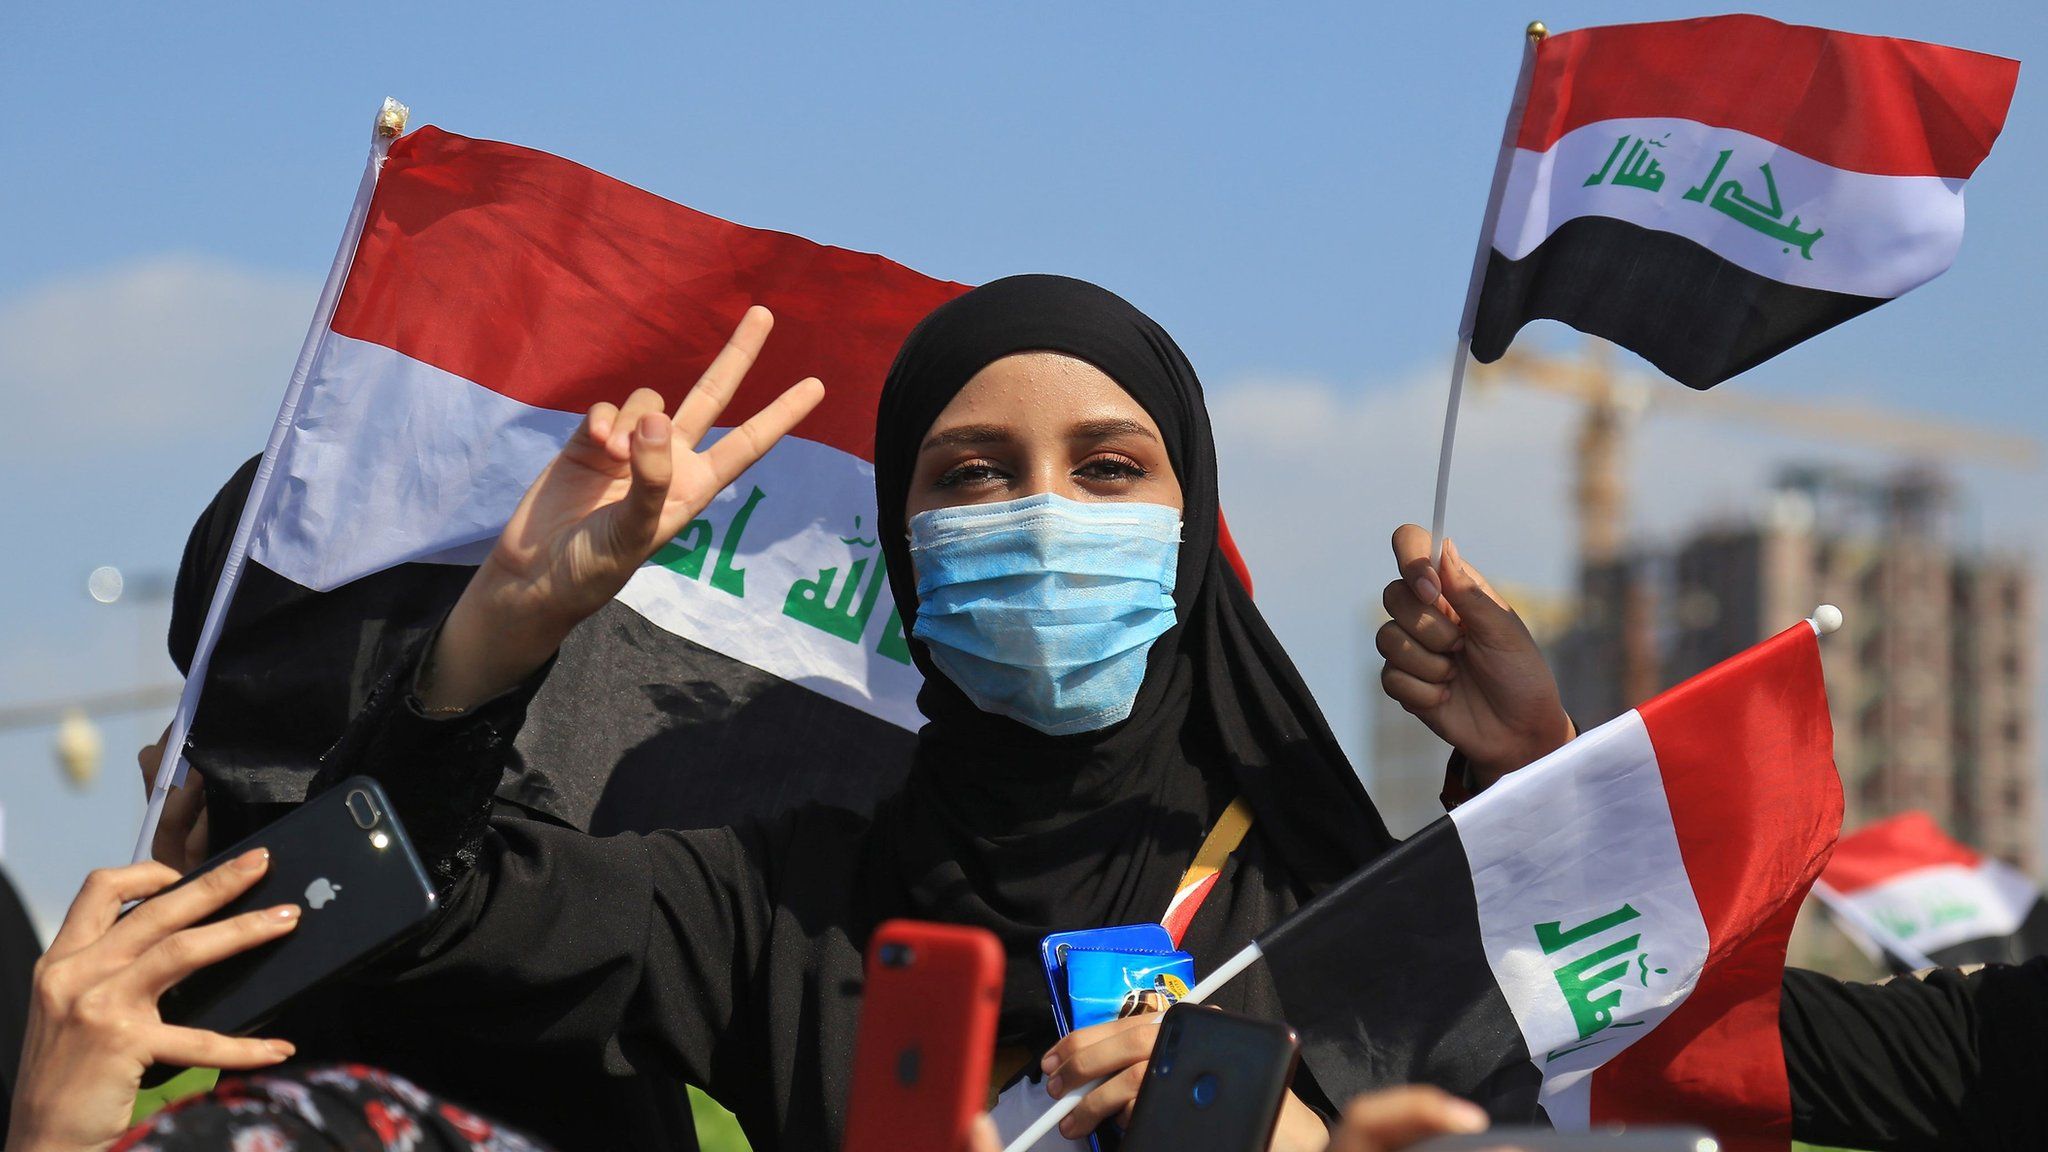 An Iraqi woman takes part in an anti-government protest in the central city of Karbala (31 October 2019)